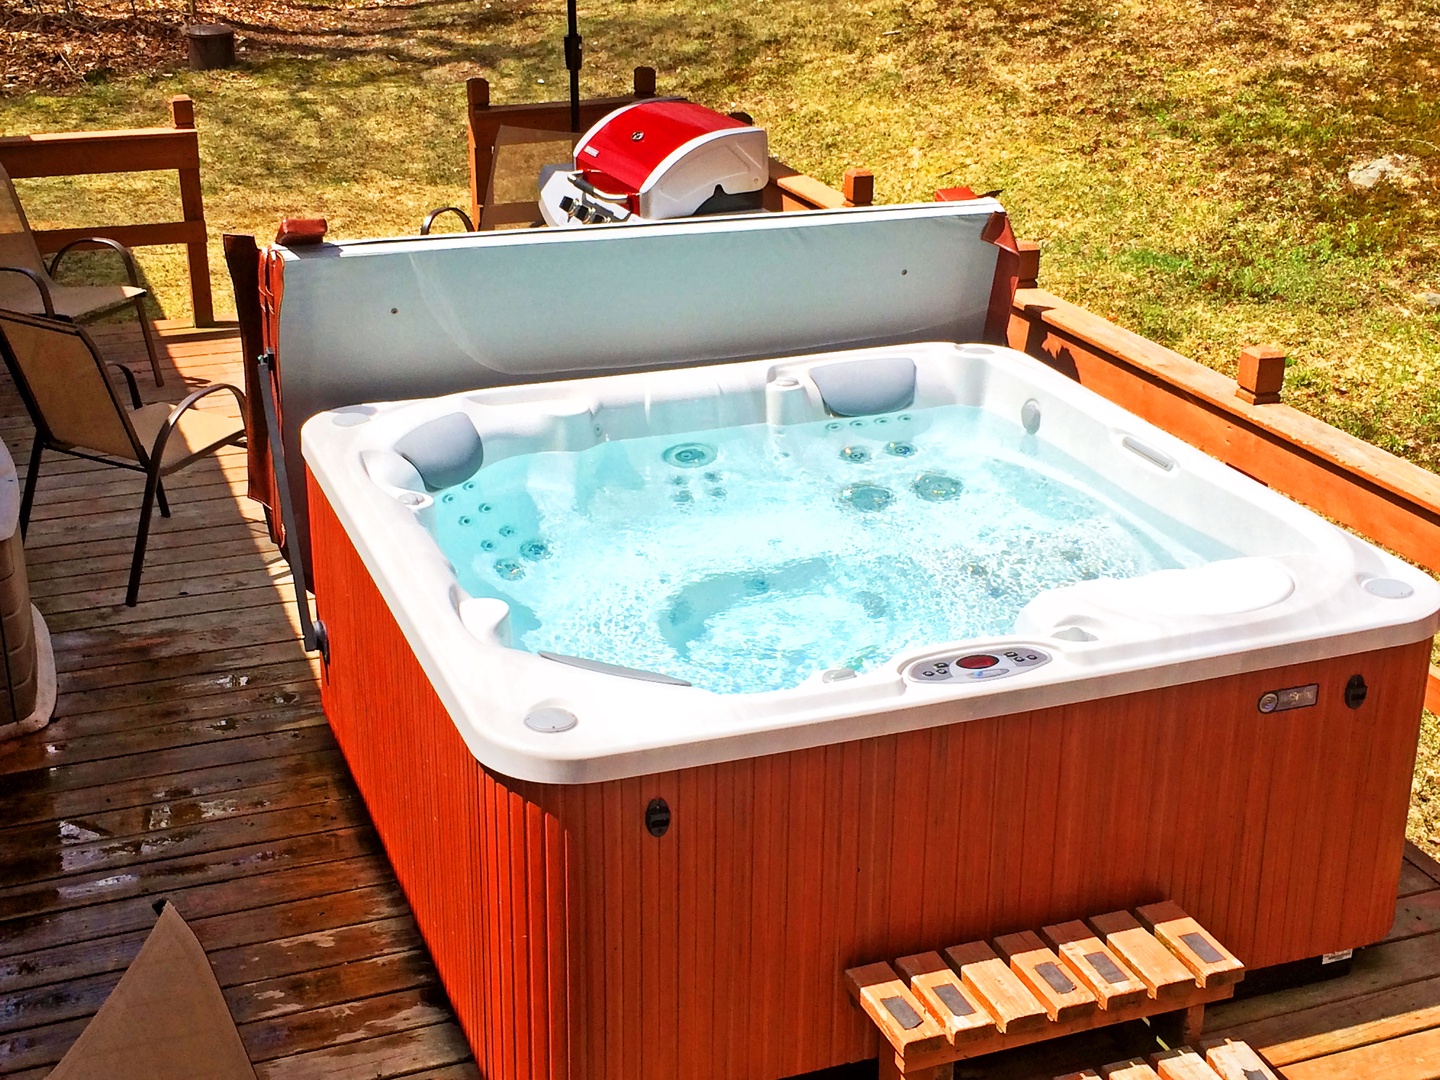 Hot tub and grill on back deck